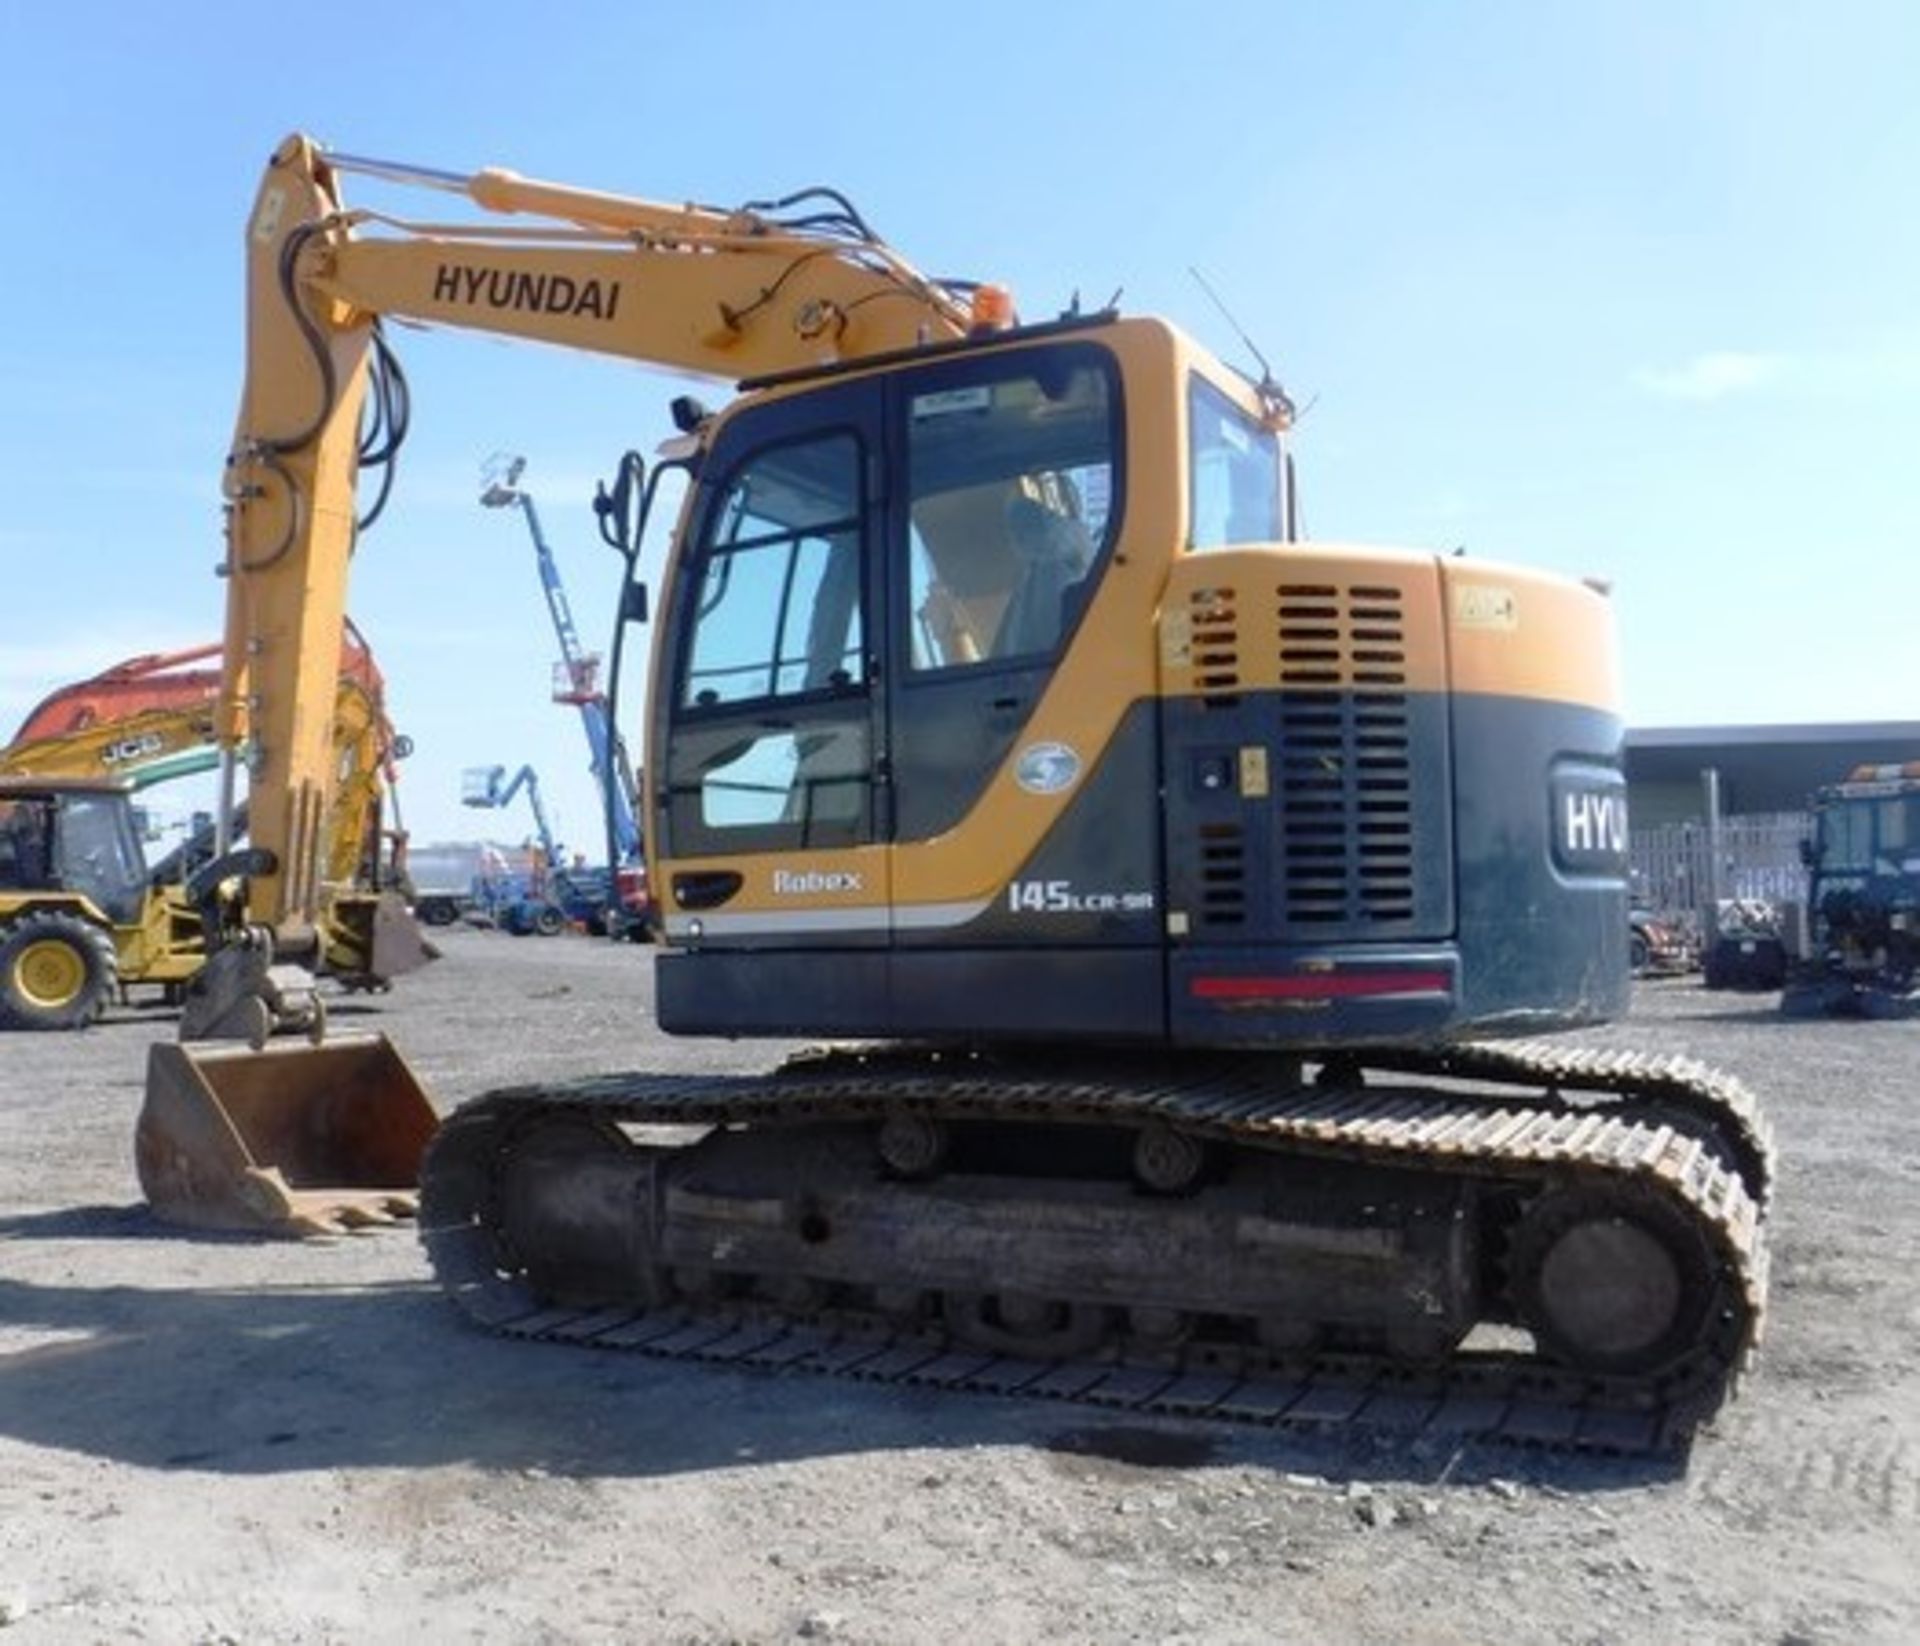 2014 HYUNDAI 145-9A excavator c/w 1 bucket. Short body version ideal for site work. s/n 068. 4263hr - Image 28 of 32